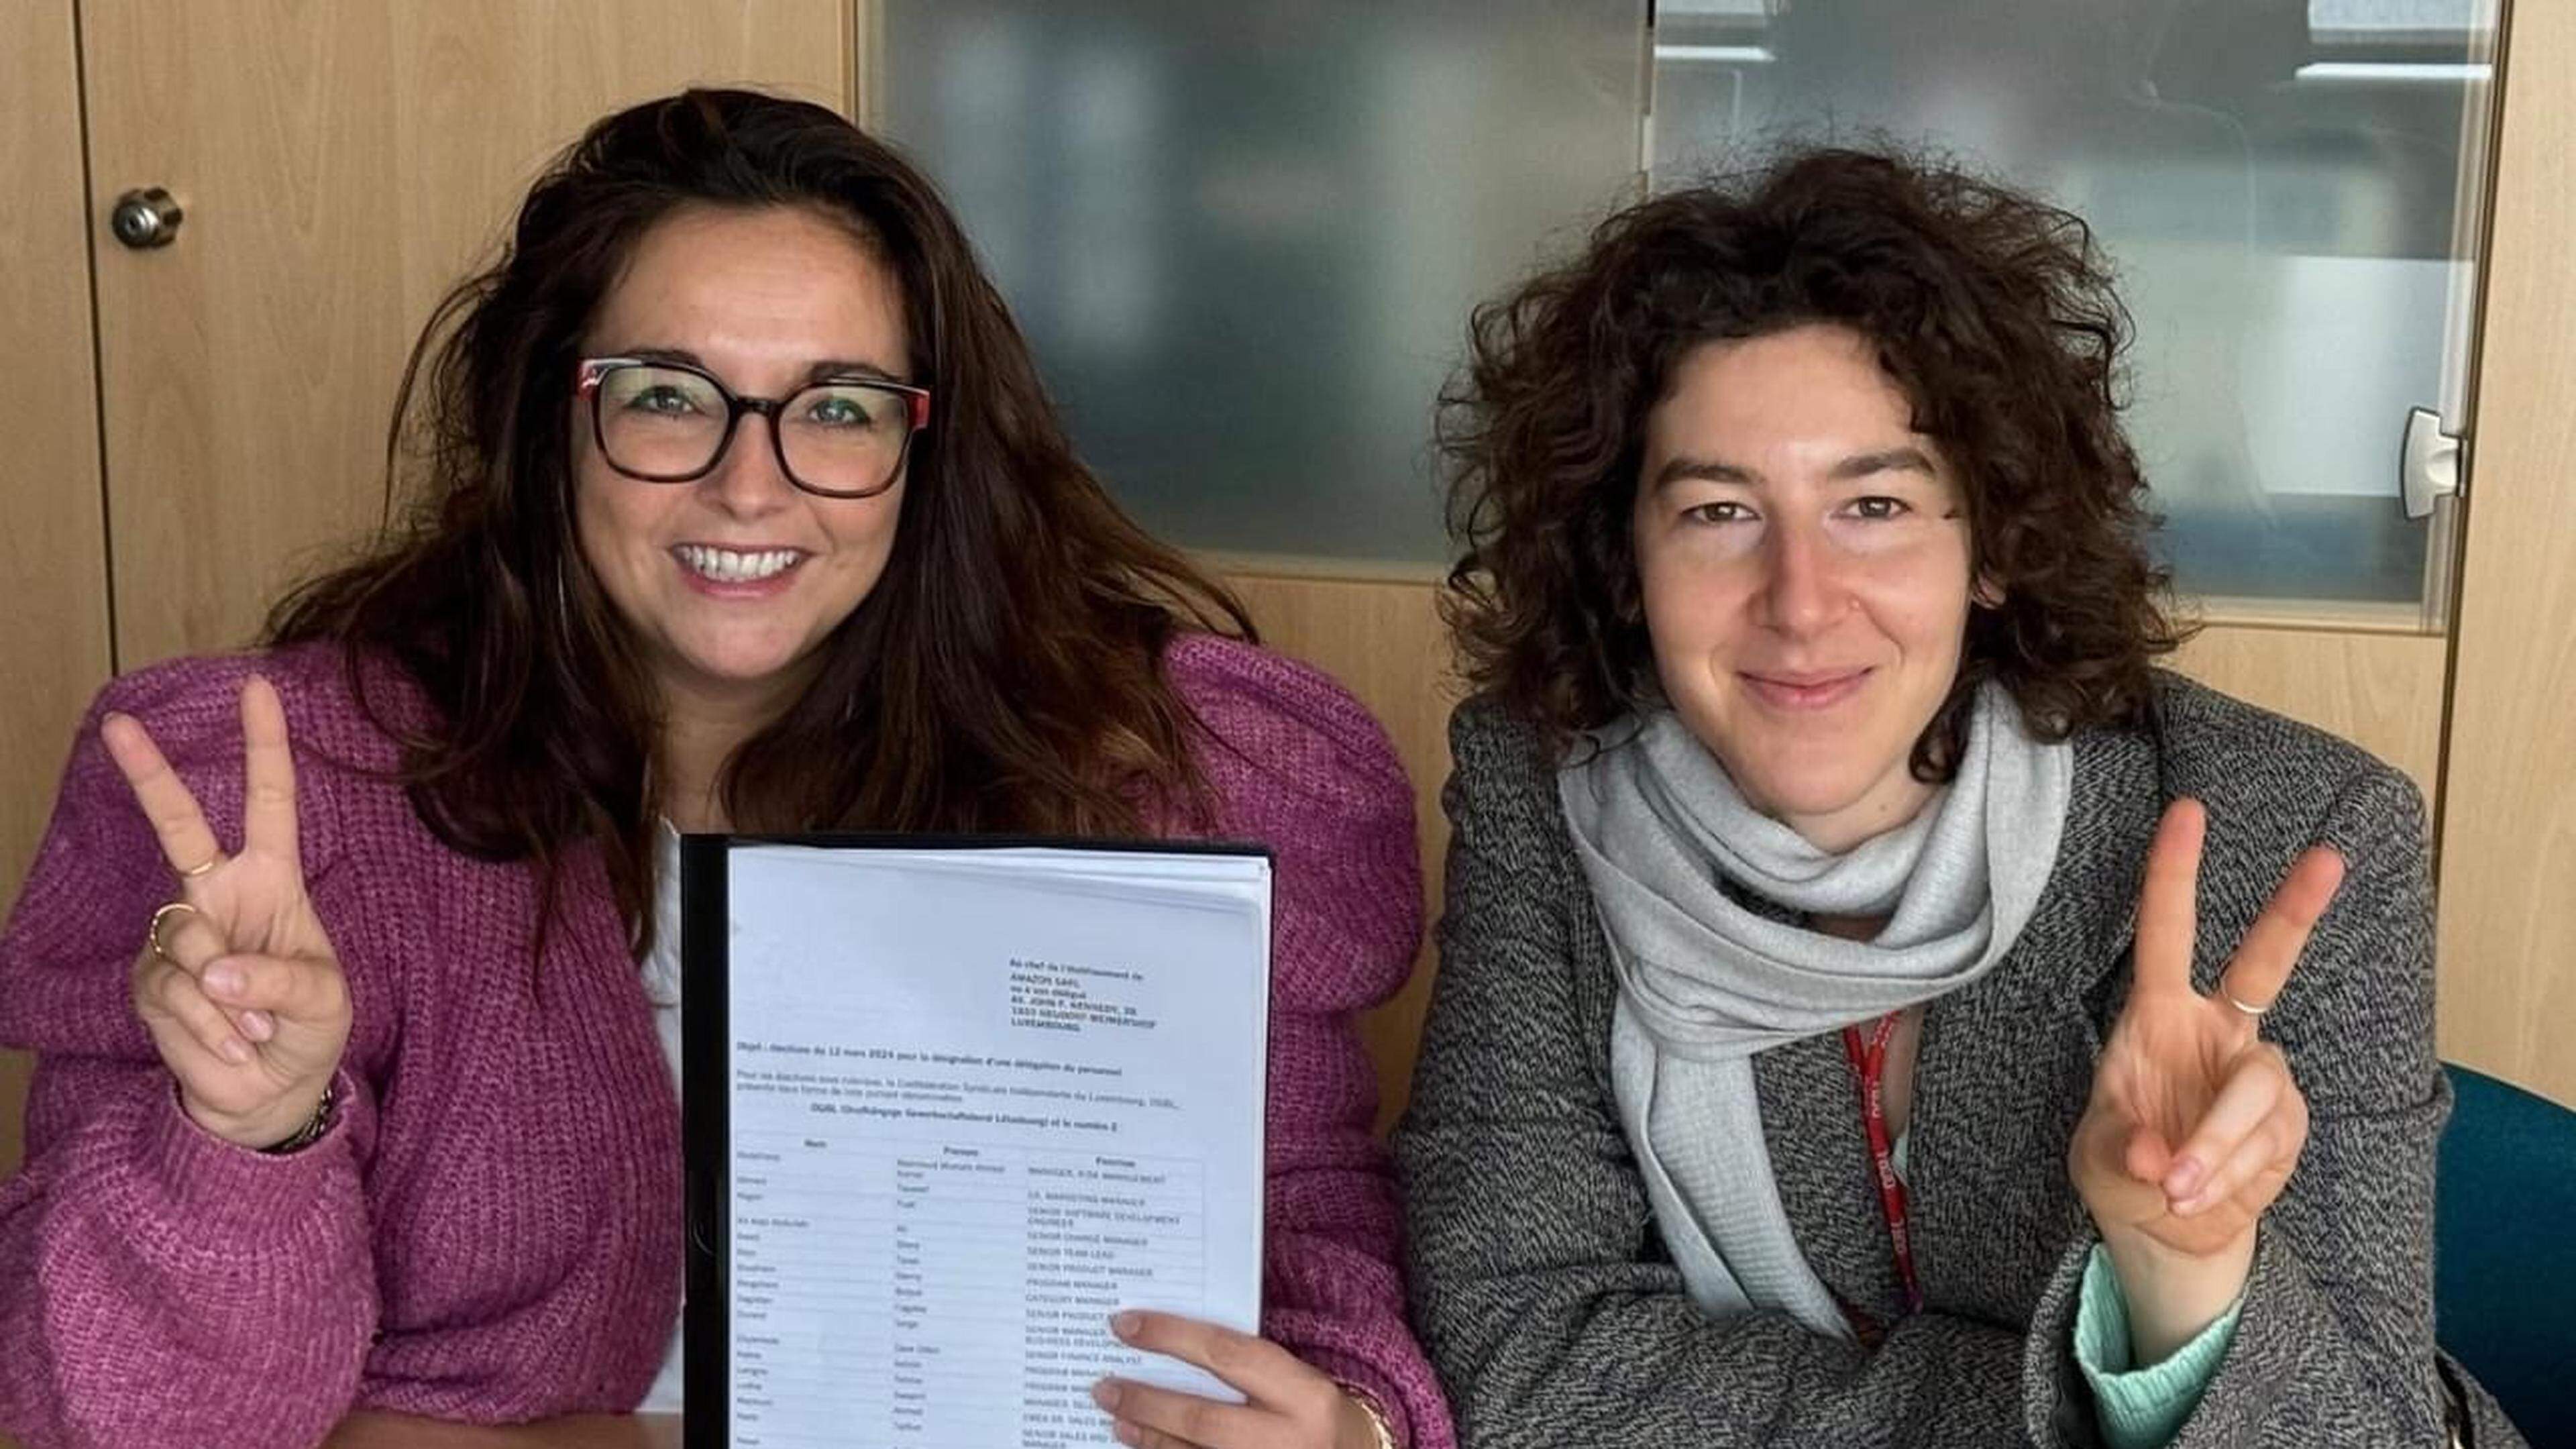 OGBL President Nora Back, pictured with Deputy Central Secretary Isabel Scott, on Monday signed off on the candidate list, which was then delivered it to Amazon’s HR department for countersignature